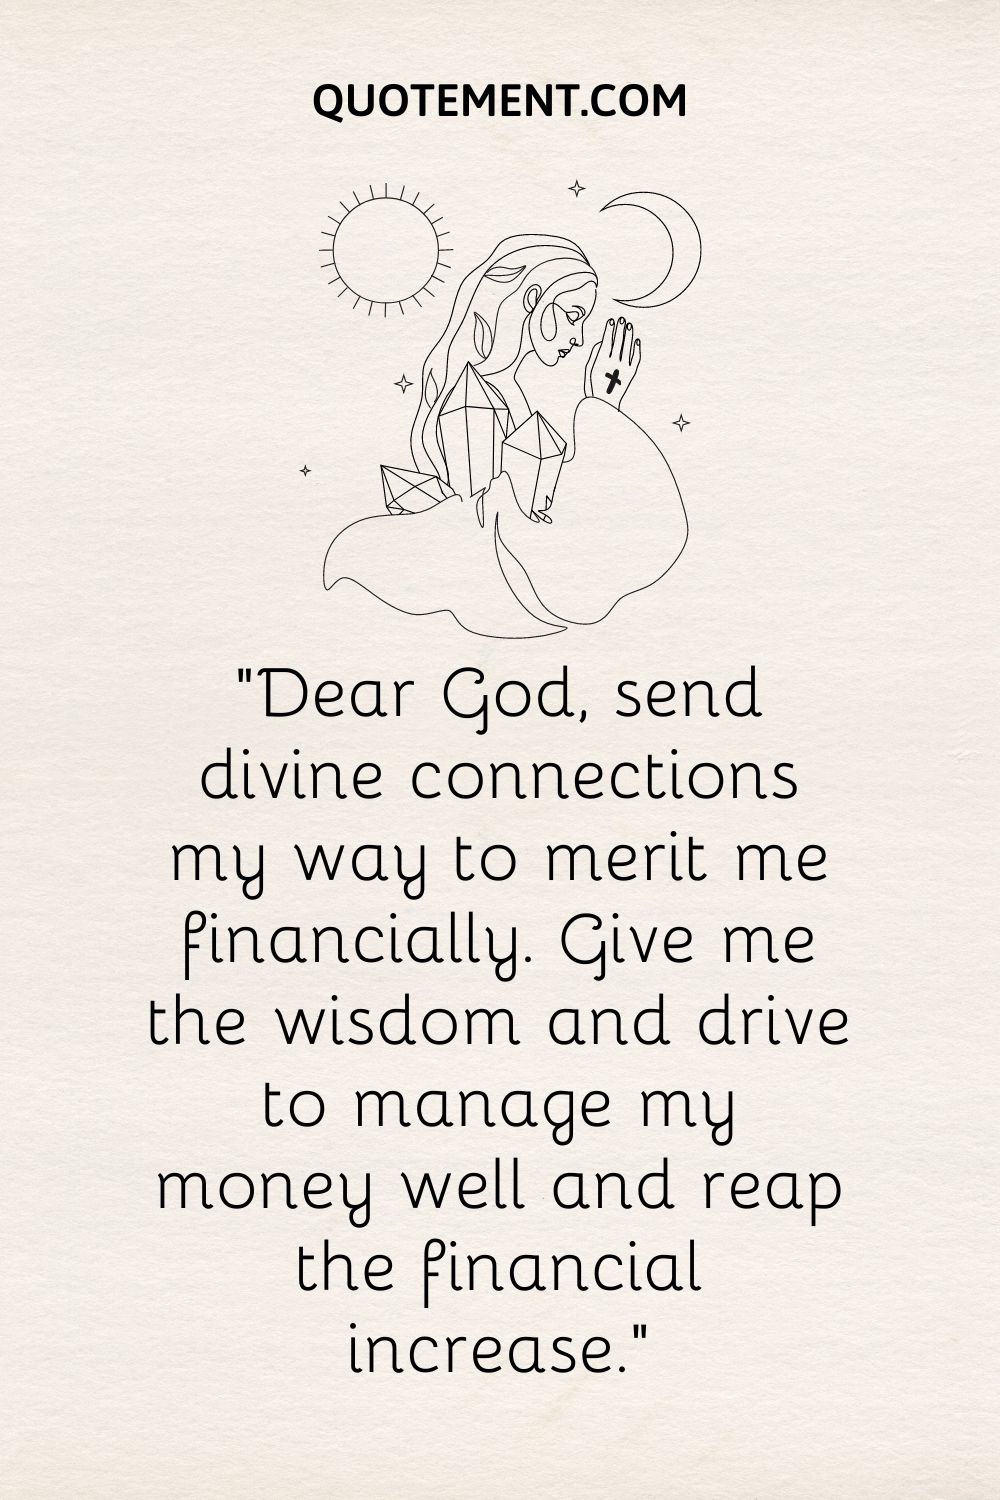 Dear God, send divine connections my way to merit me financially